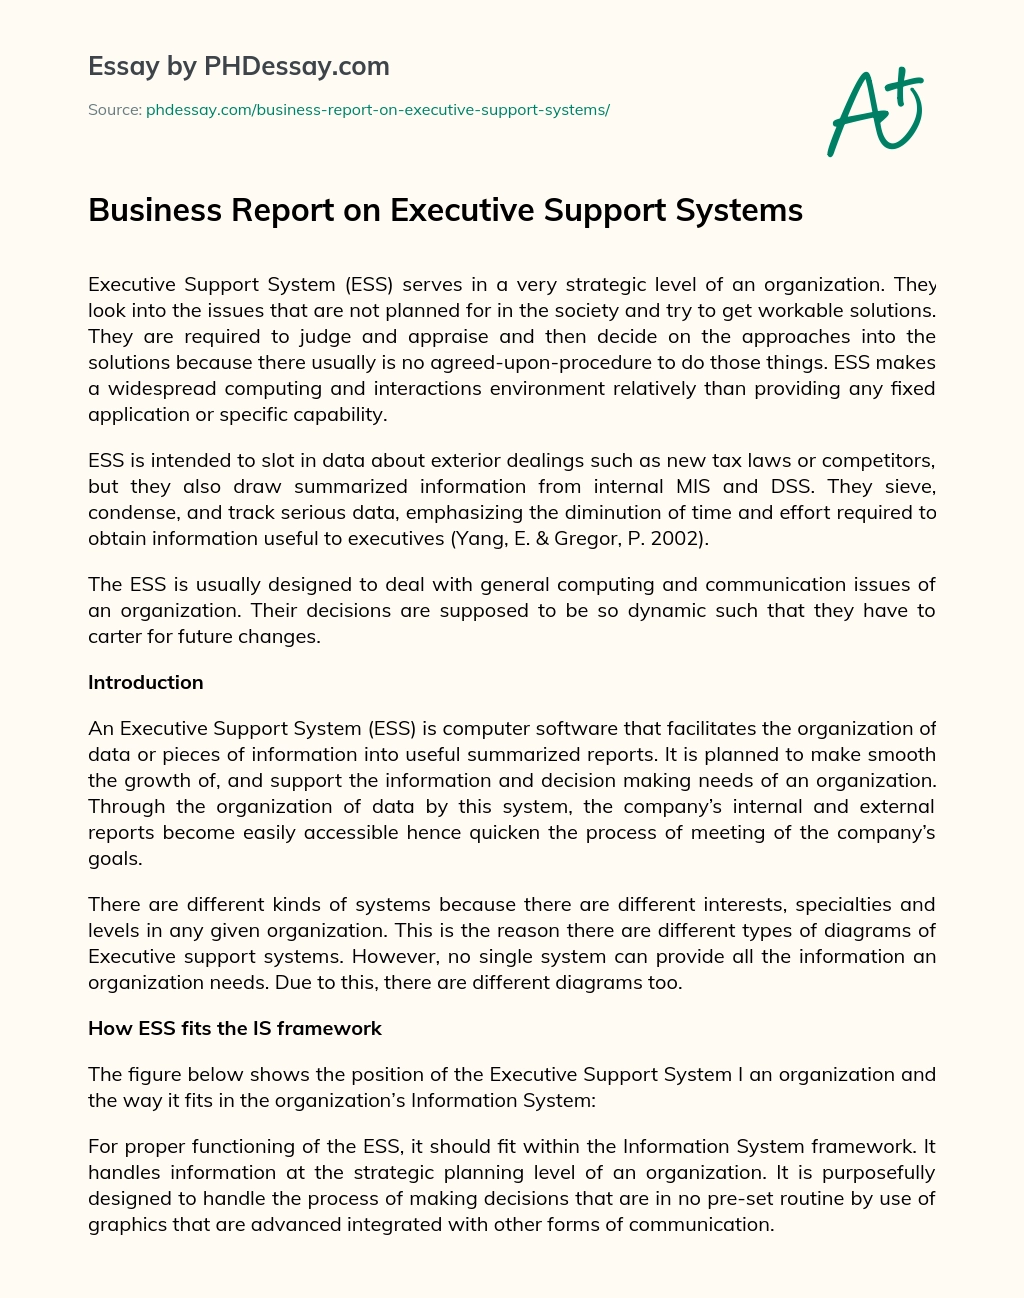 Business Report on Executive Support Systems essay